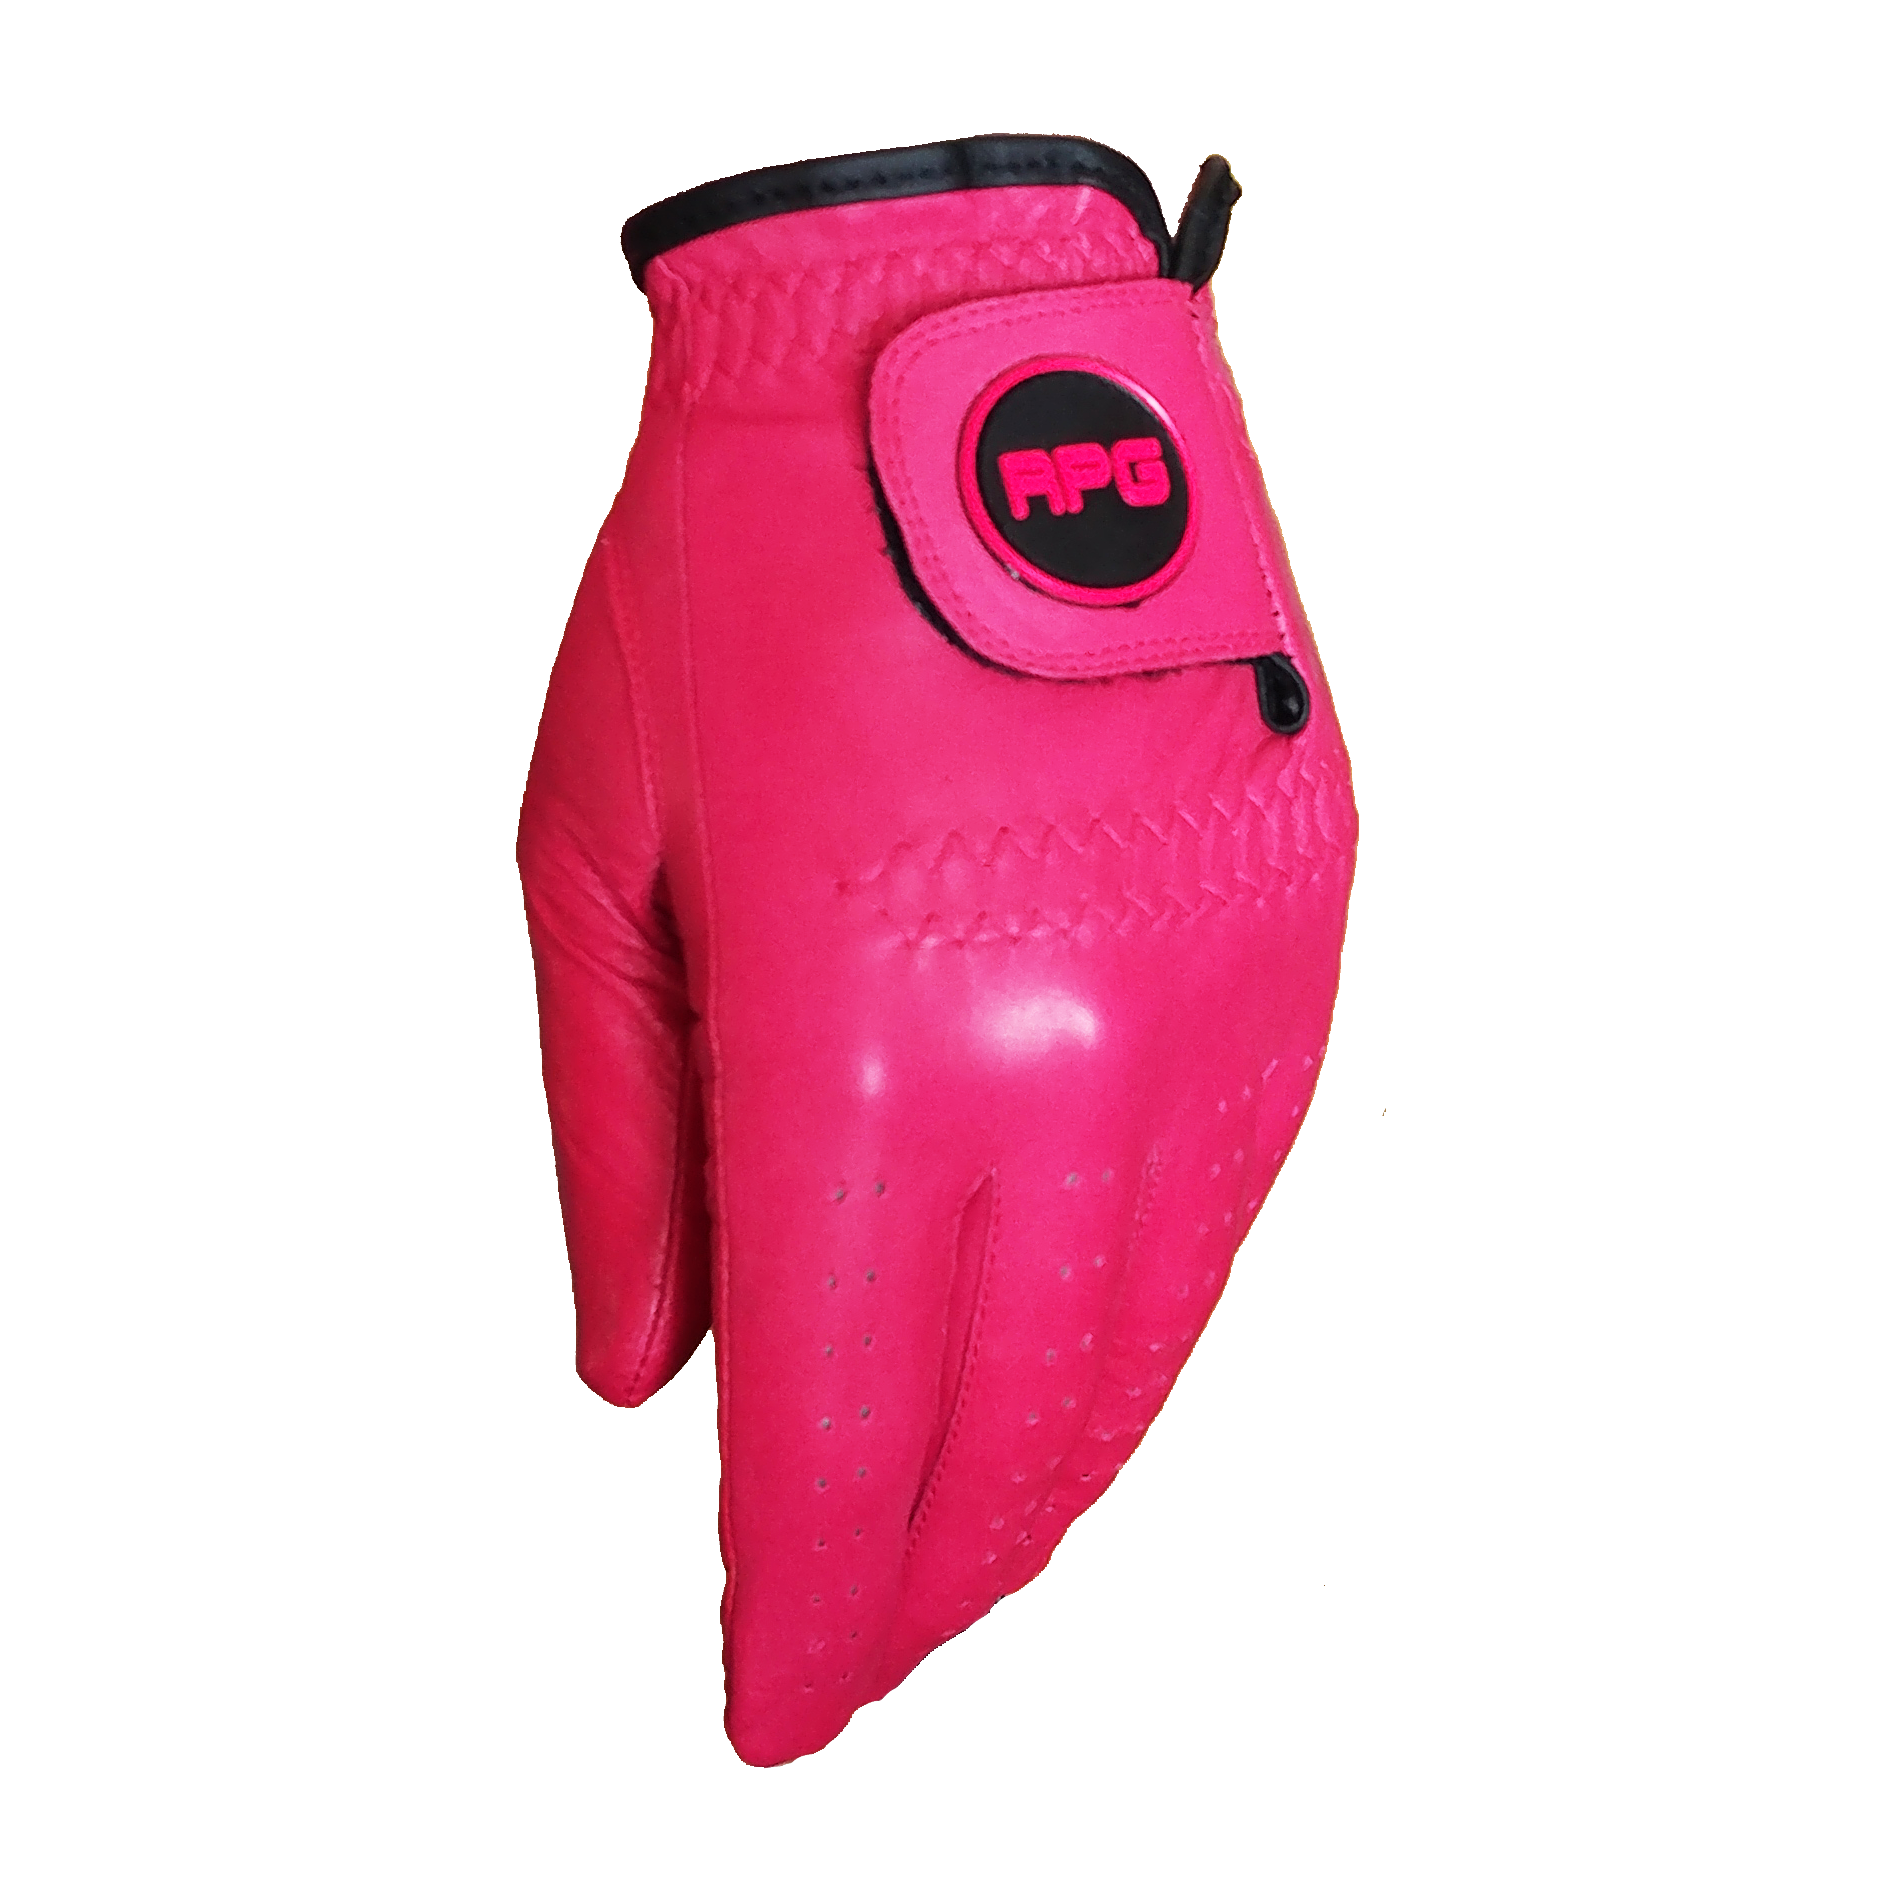 RPG 100% CABRETTA LEATHER COLOR GOLF GLOVE (WOMENS-LEFT HAND-PINK) - RED PLANET GOLF